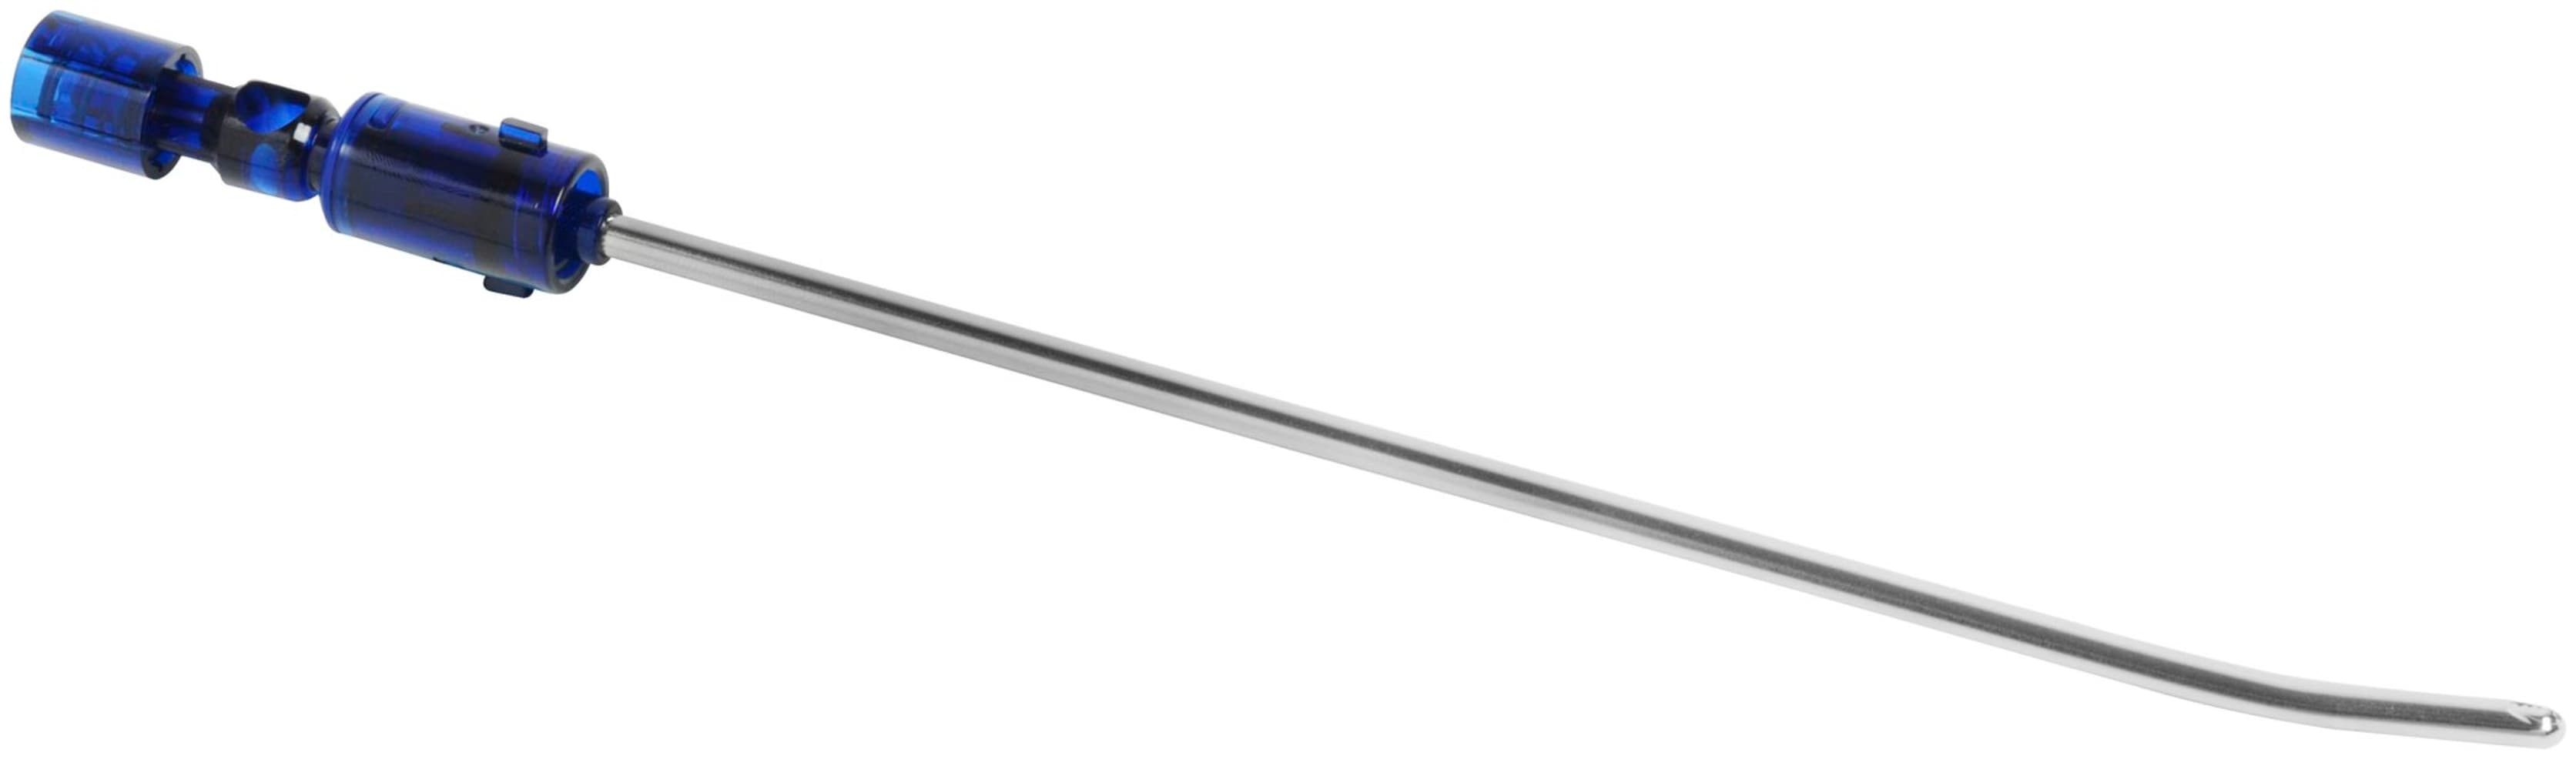 Dissector, Curved, HL, 4.2 mm x 19 cm